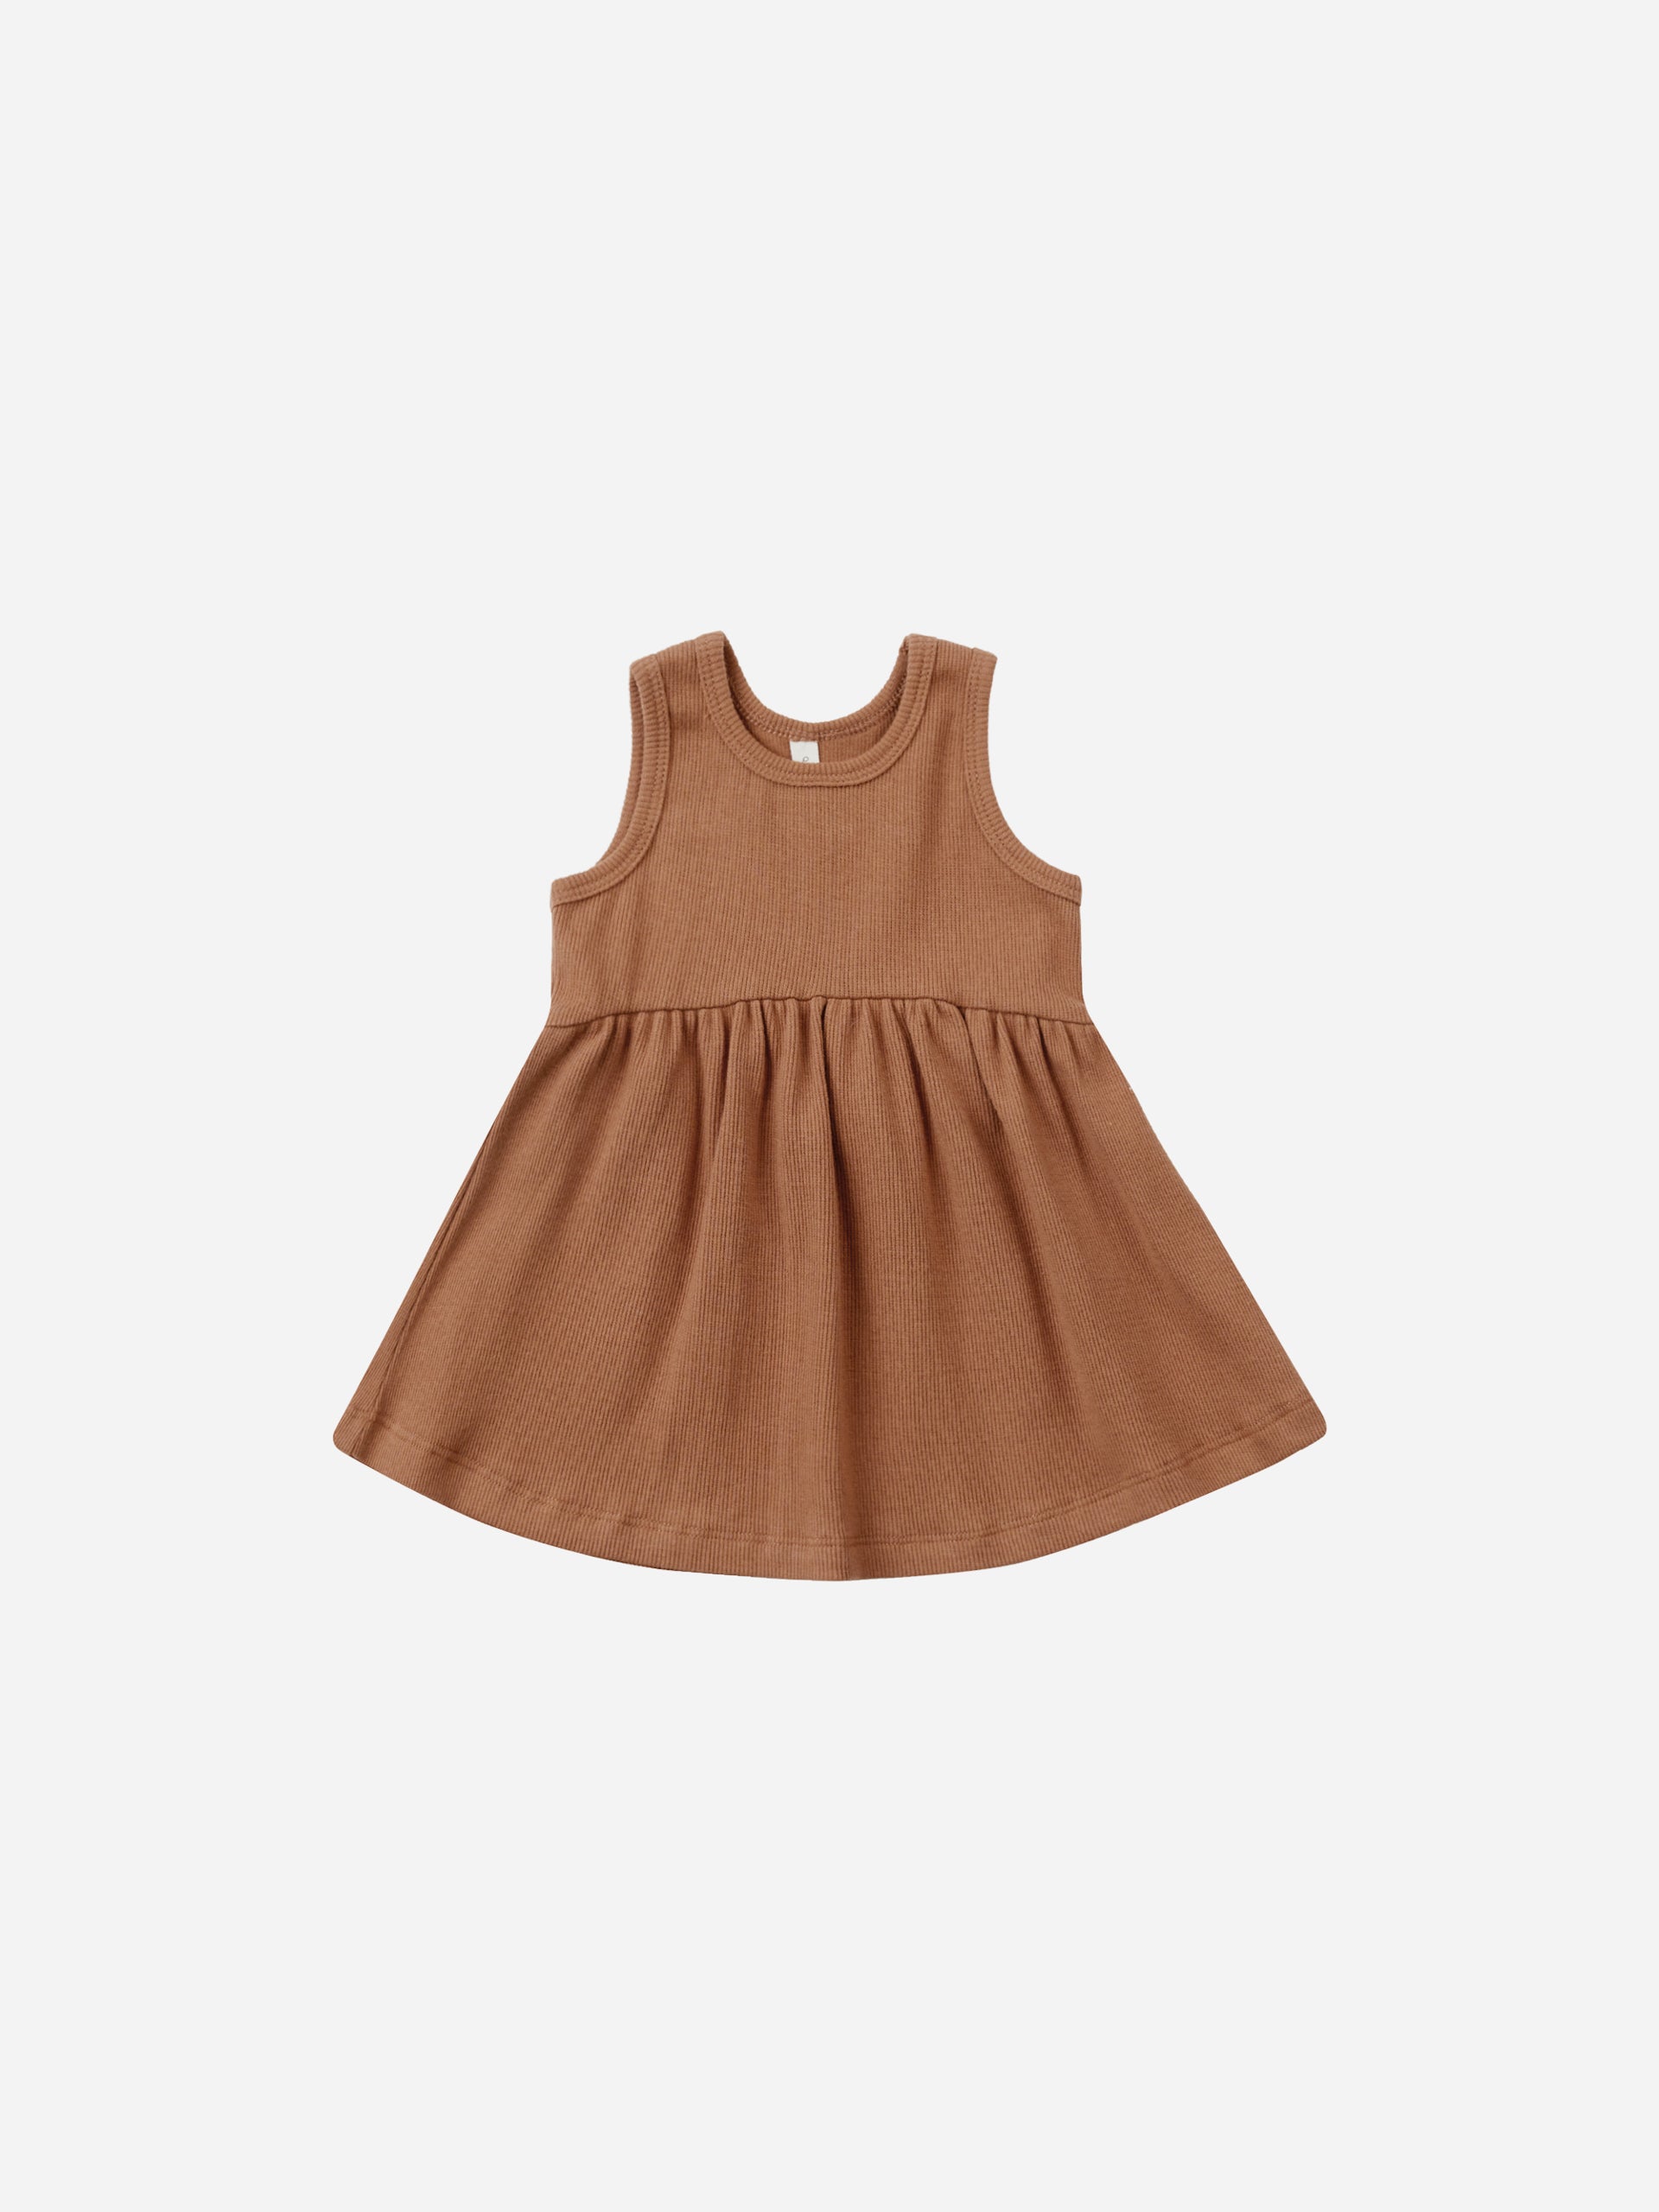 Ribbed Tank Dress || Clay - Rylee + Cru | Kids Clothes | Trendy Baby Clothes | Modern Infant Outfits |